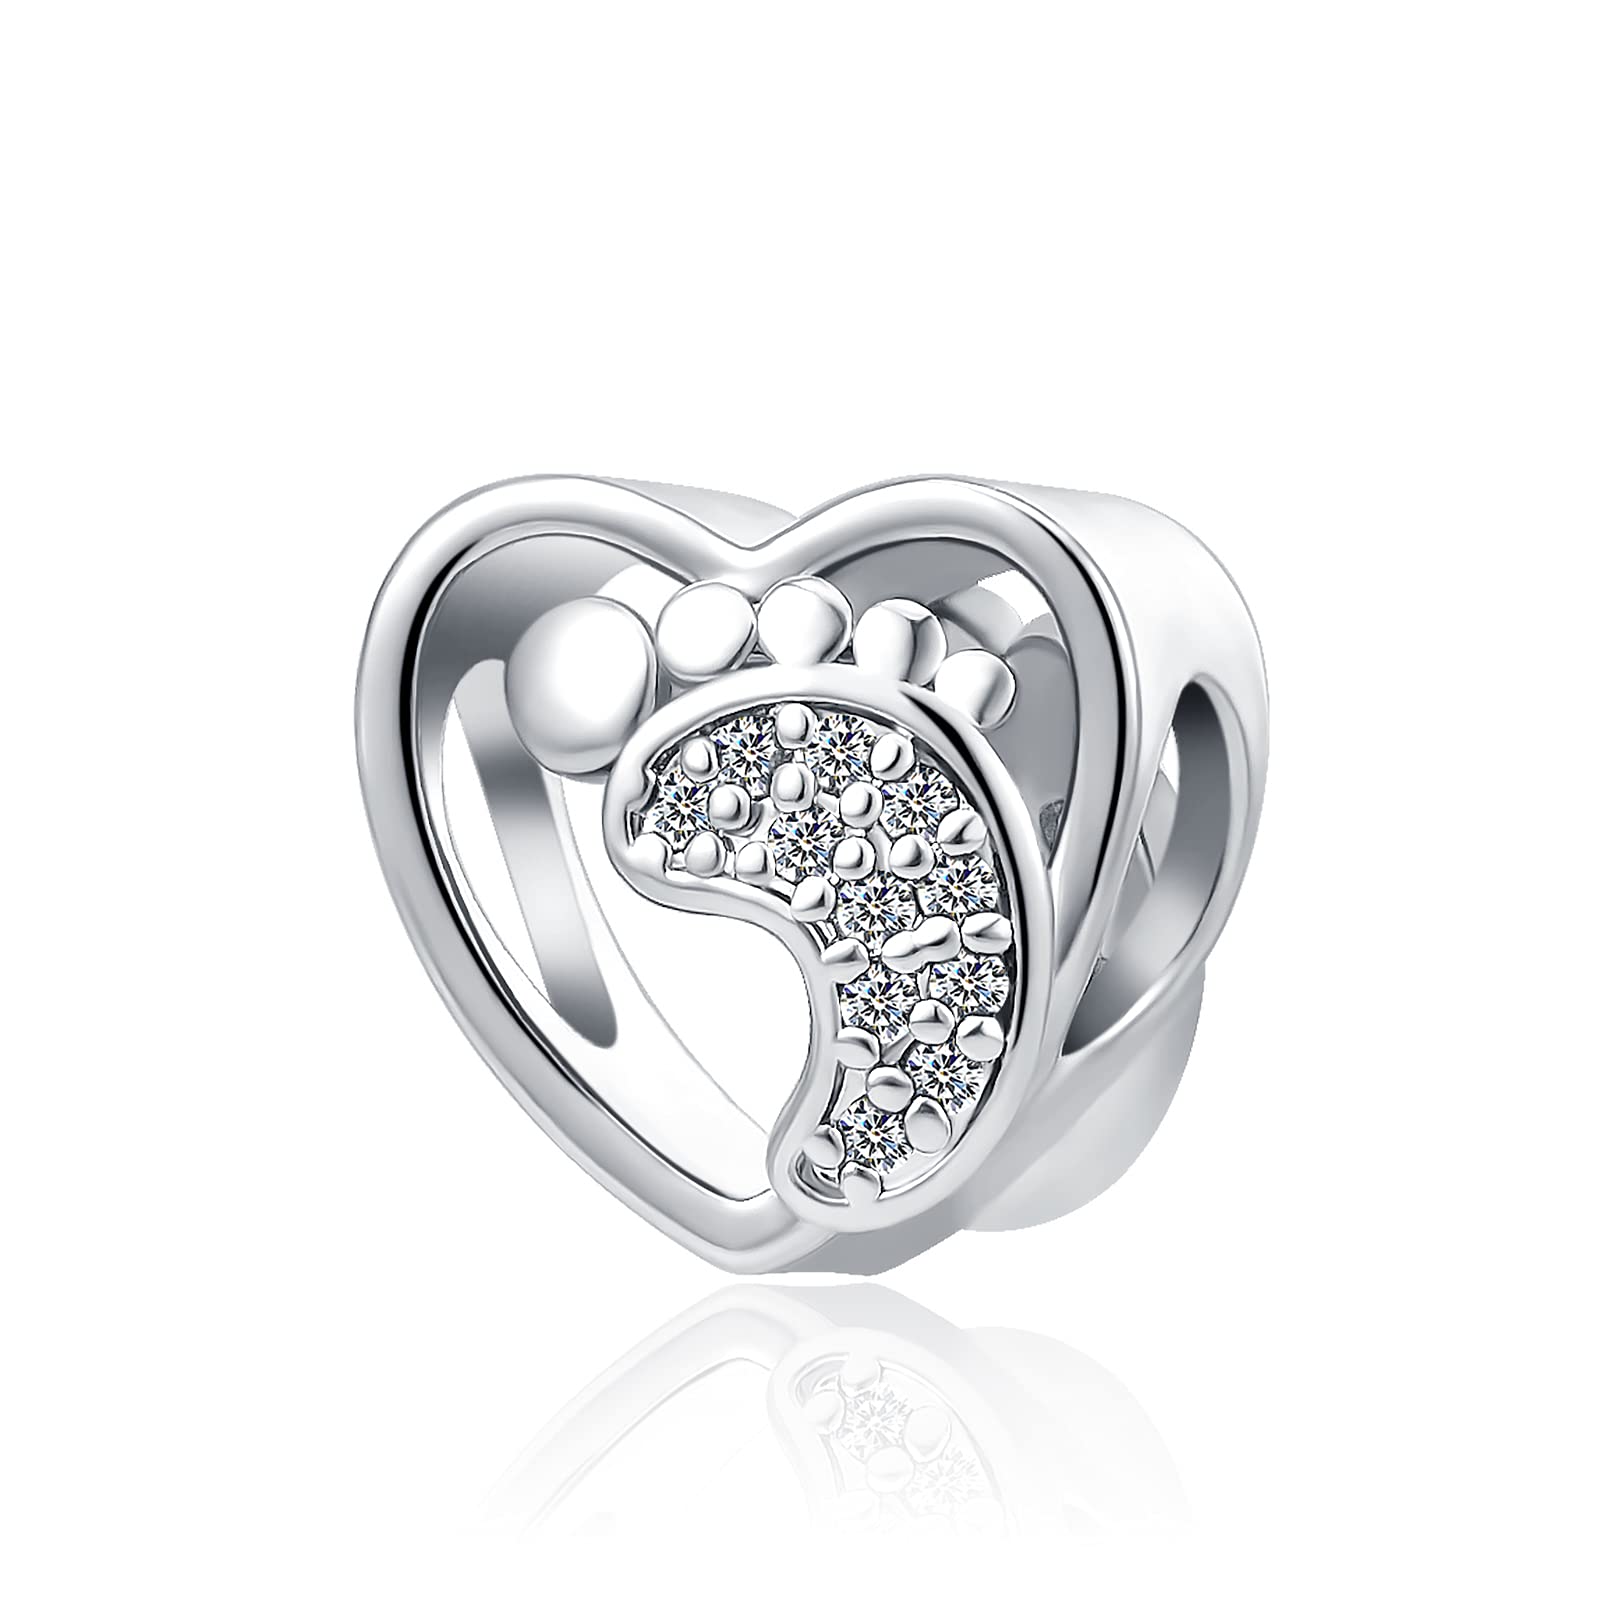 QeenseKc Baby First Feet Charm Openwork Heart Footprint Bead for New Mom Gift for Pandora Charm Bracelet